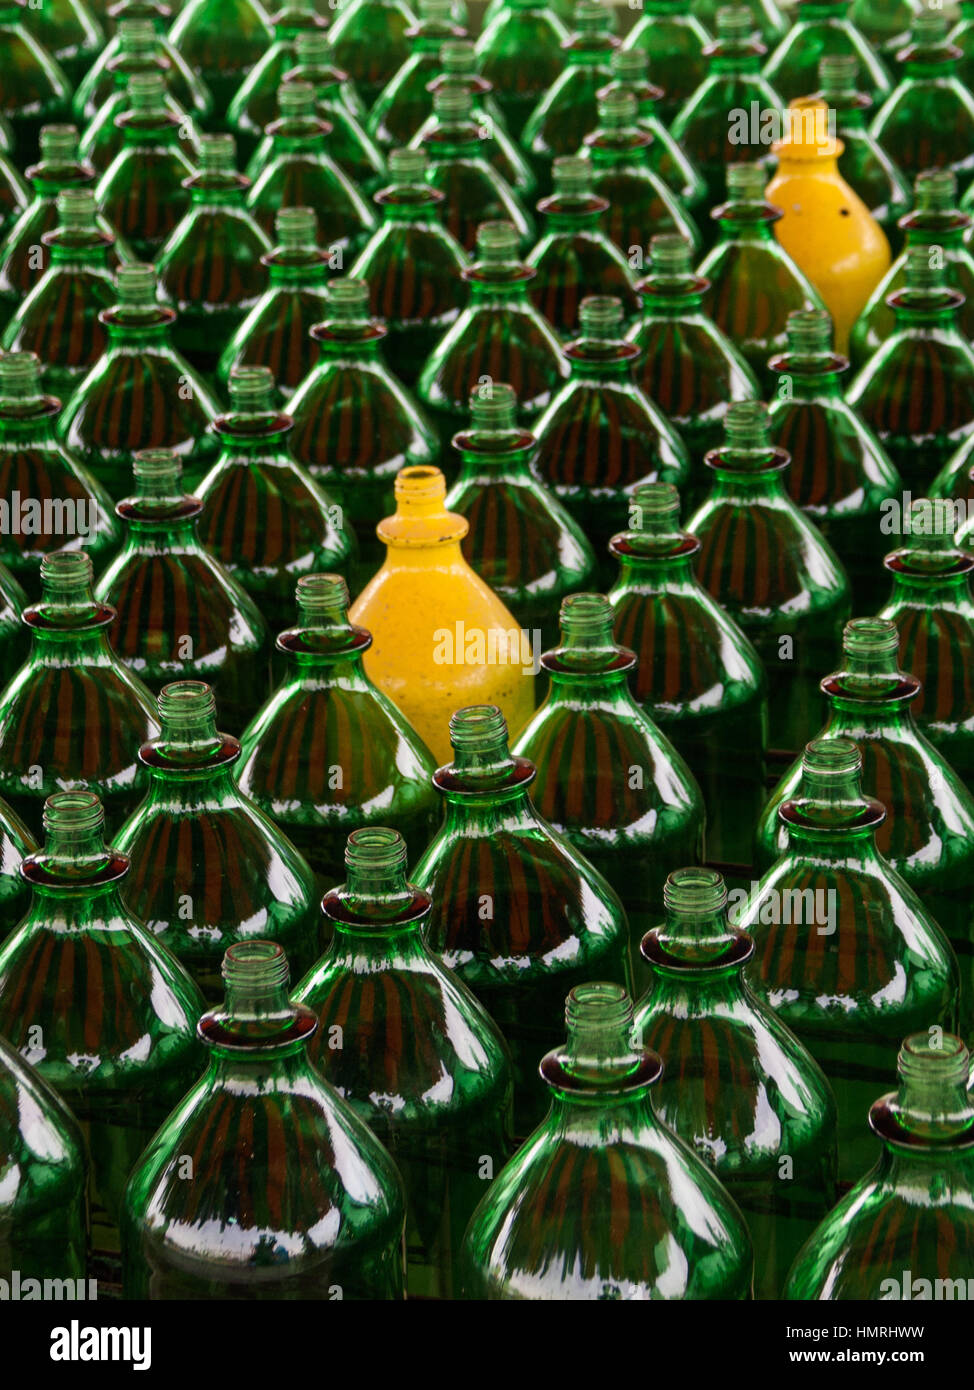 Download Many Green Bottles And Only Two Yellow Painted Ones Stock Photo Alamy Yellowimages Mockups